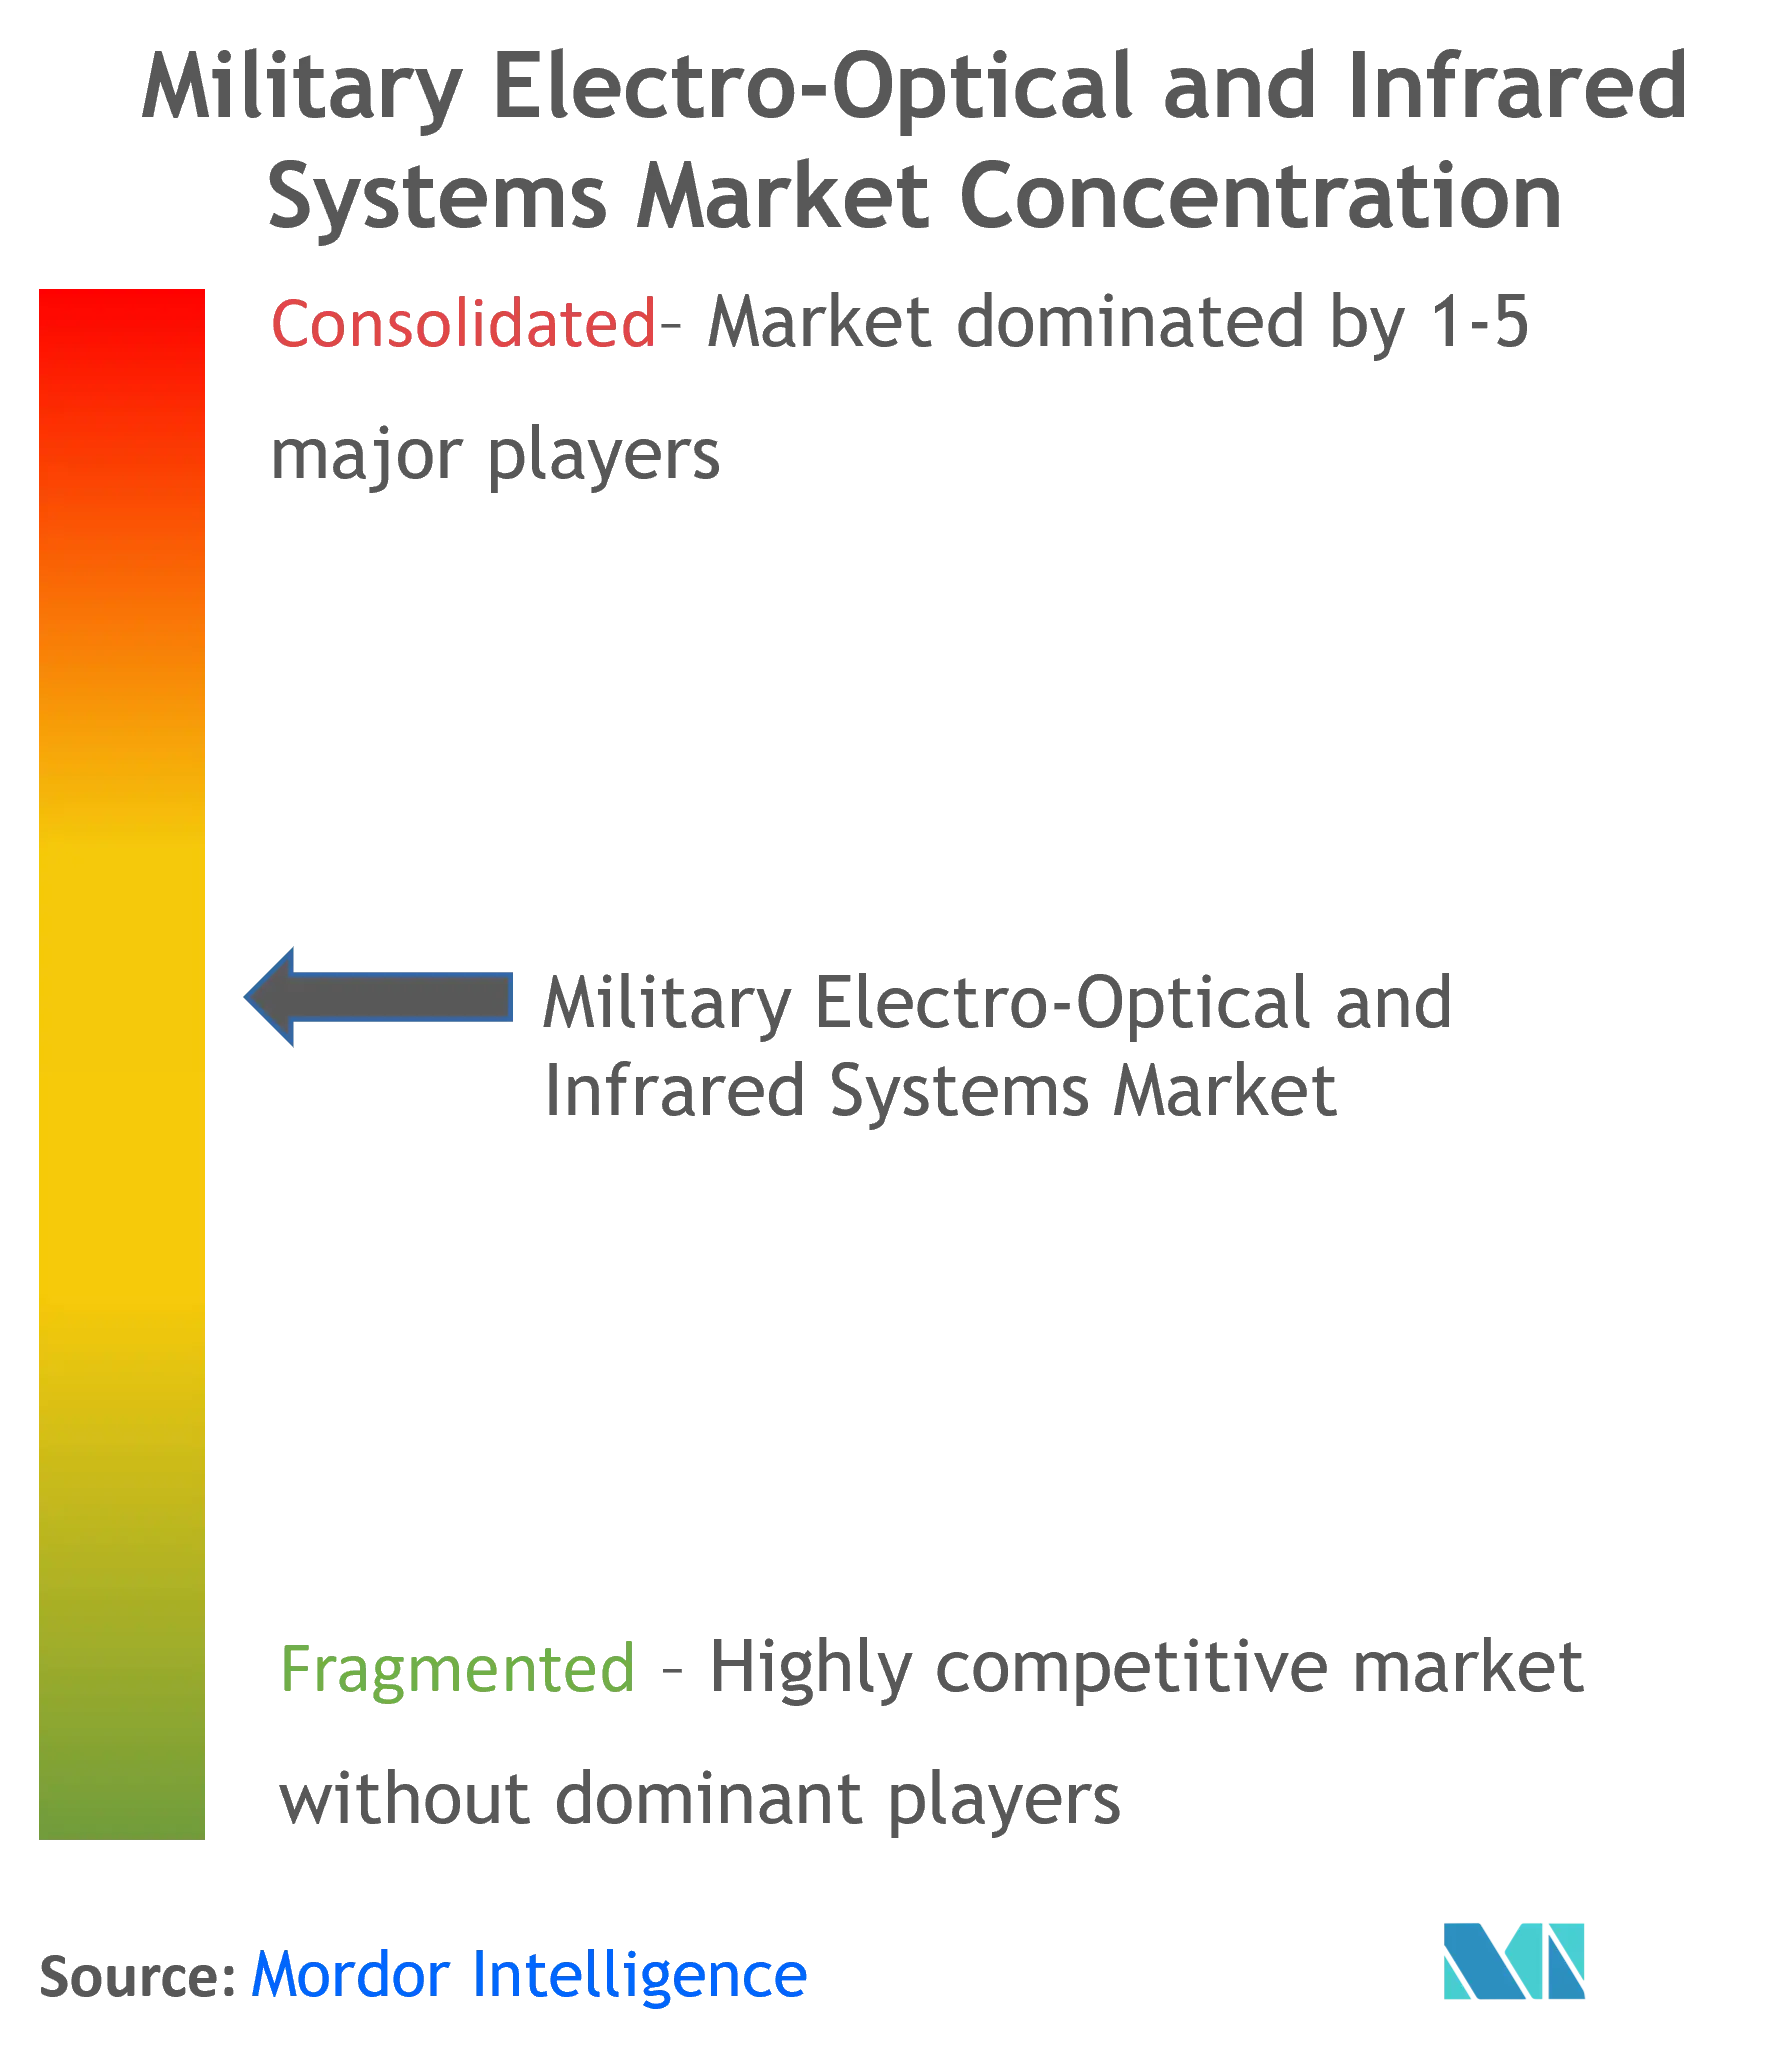 Military Electro-optical And Infrared Systems Market Concentration